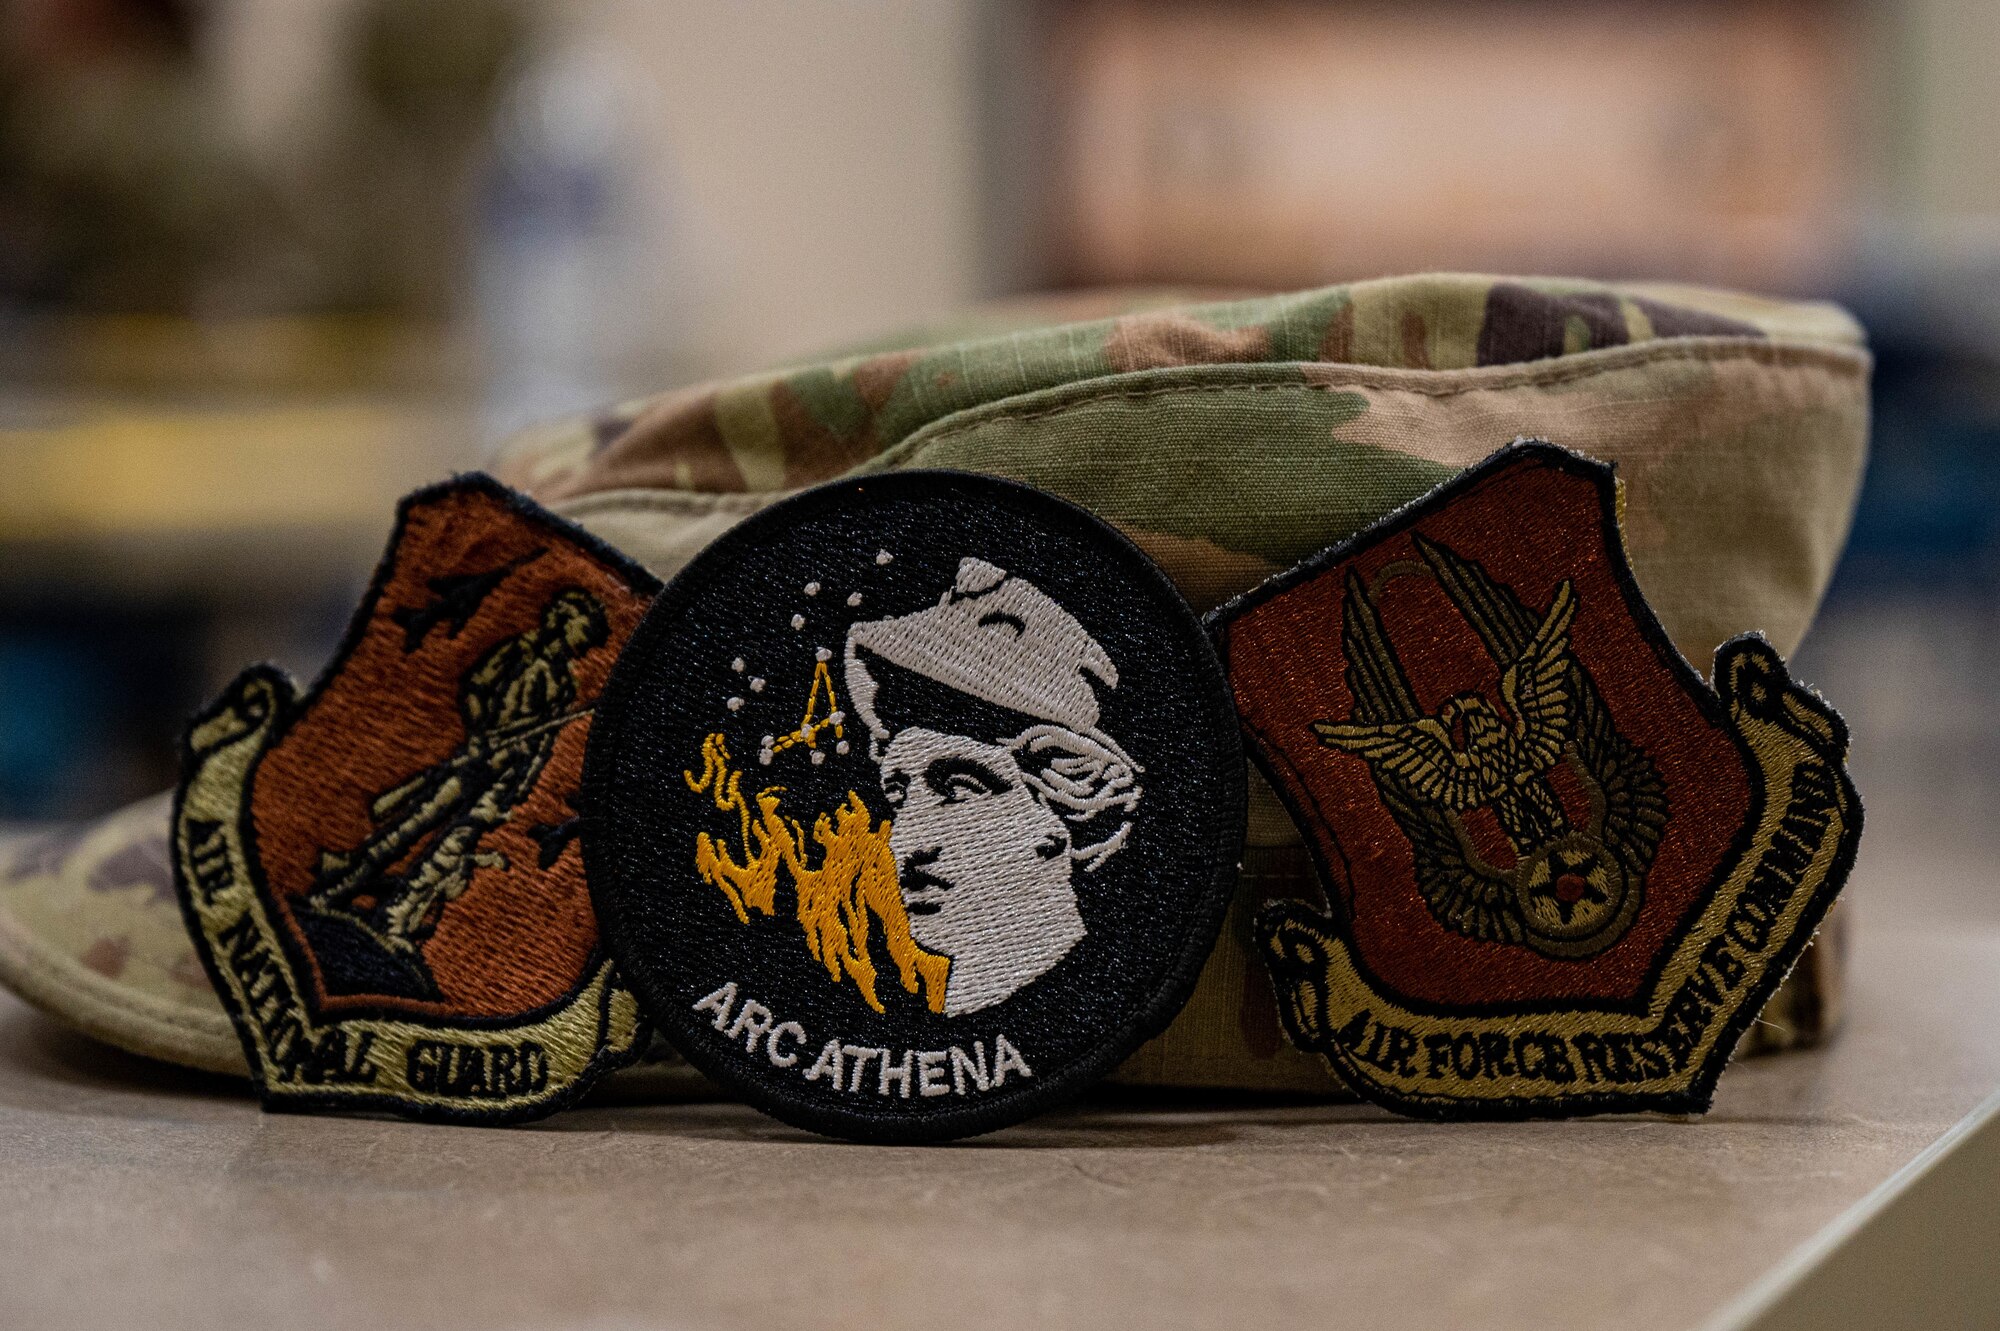 Three military patches sit propped against an OCP hat